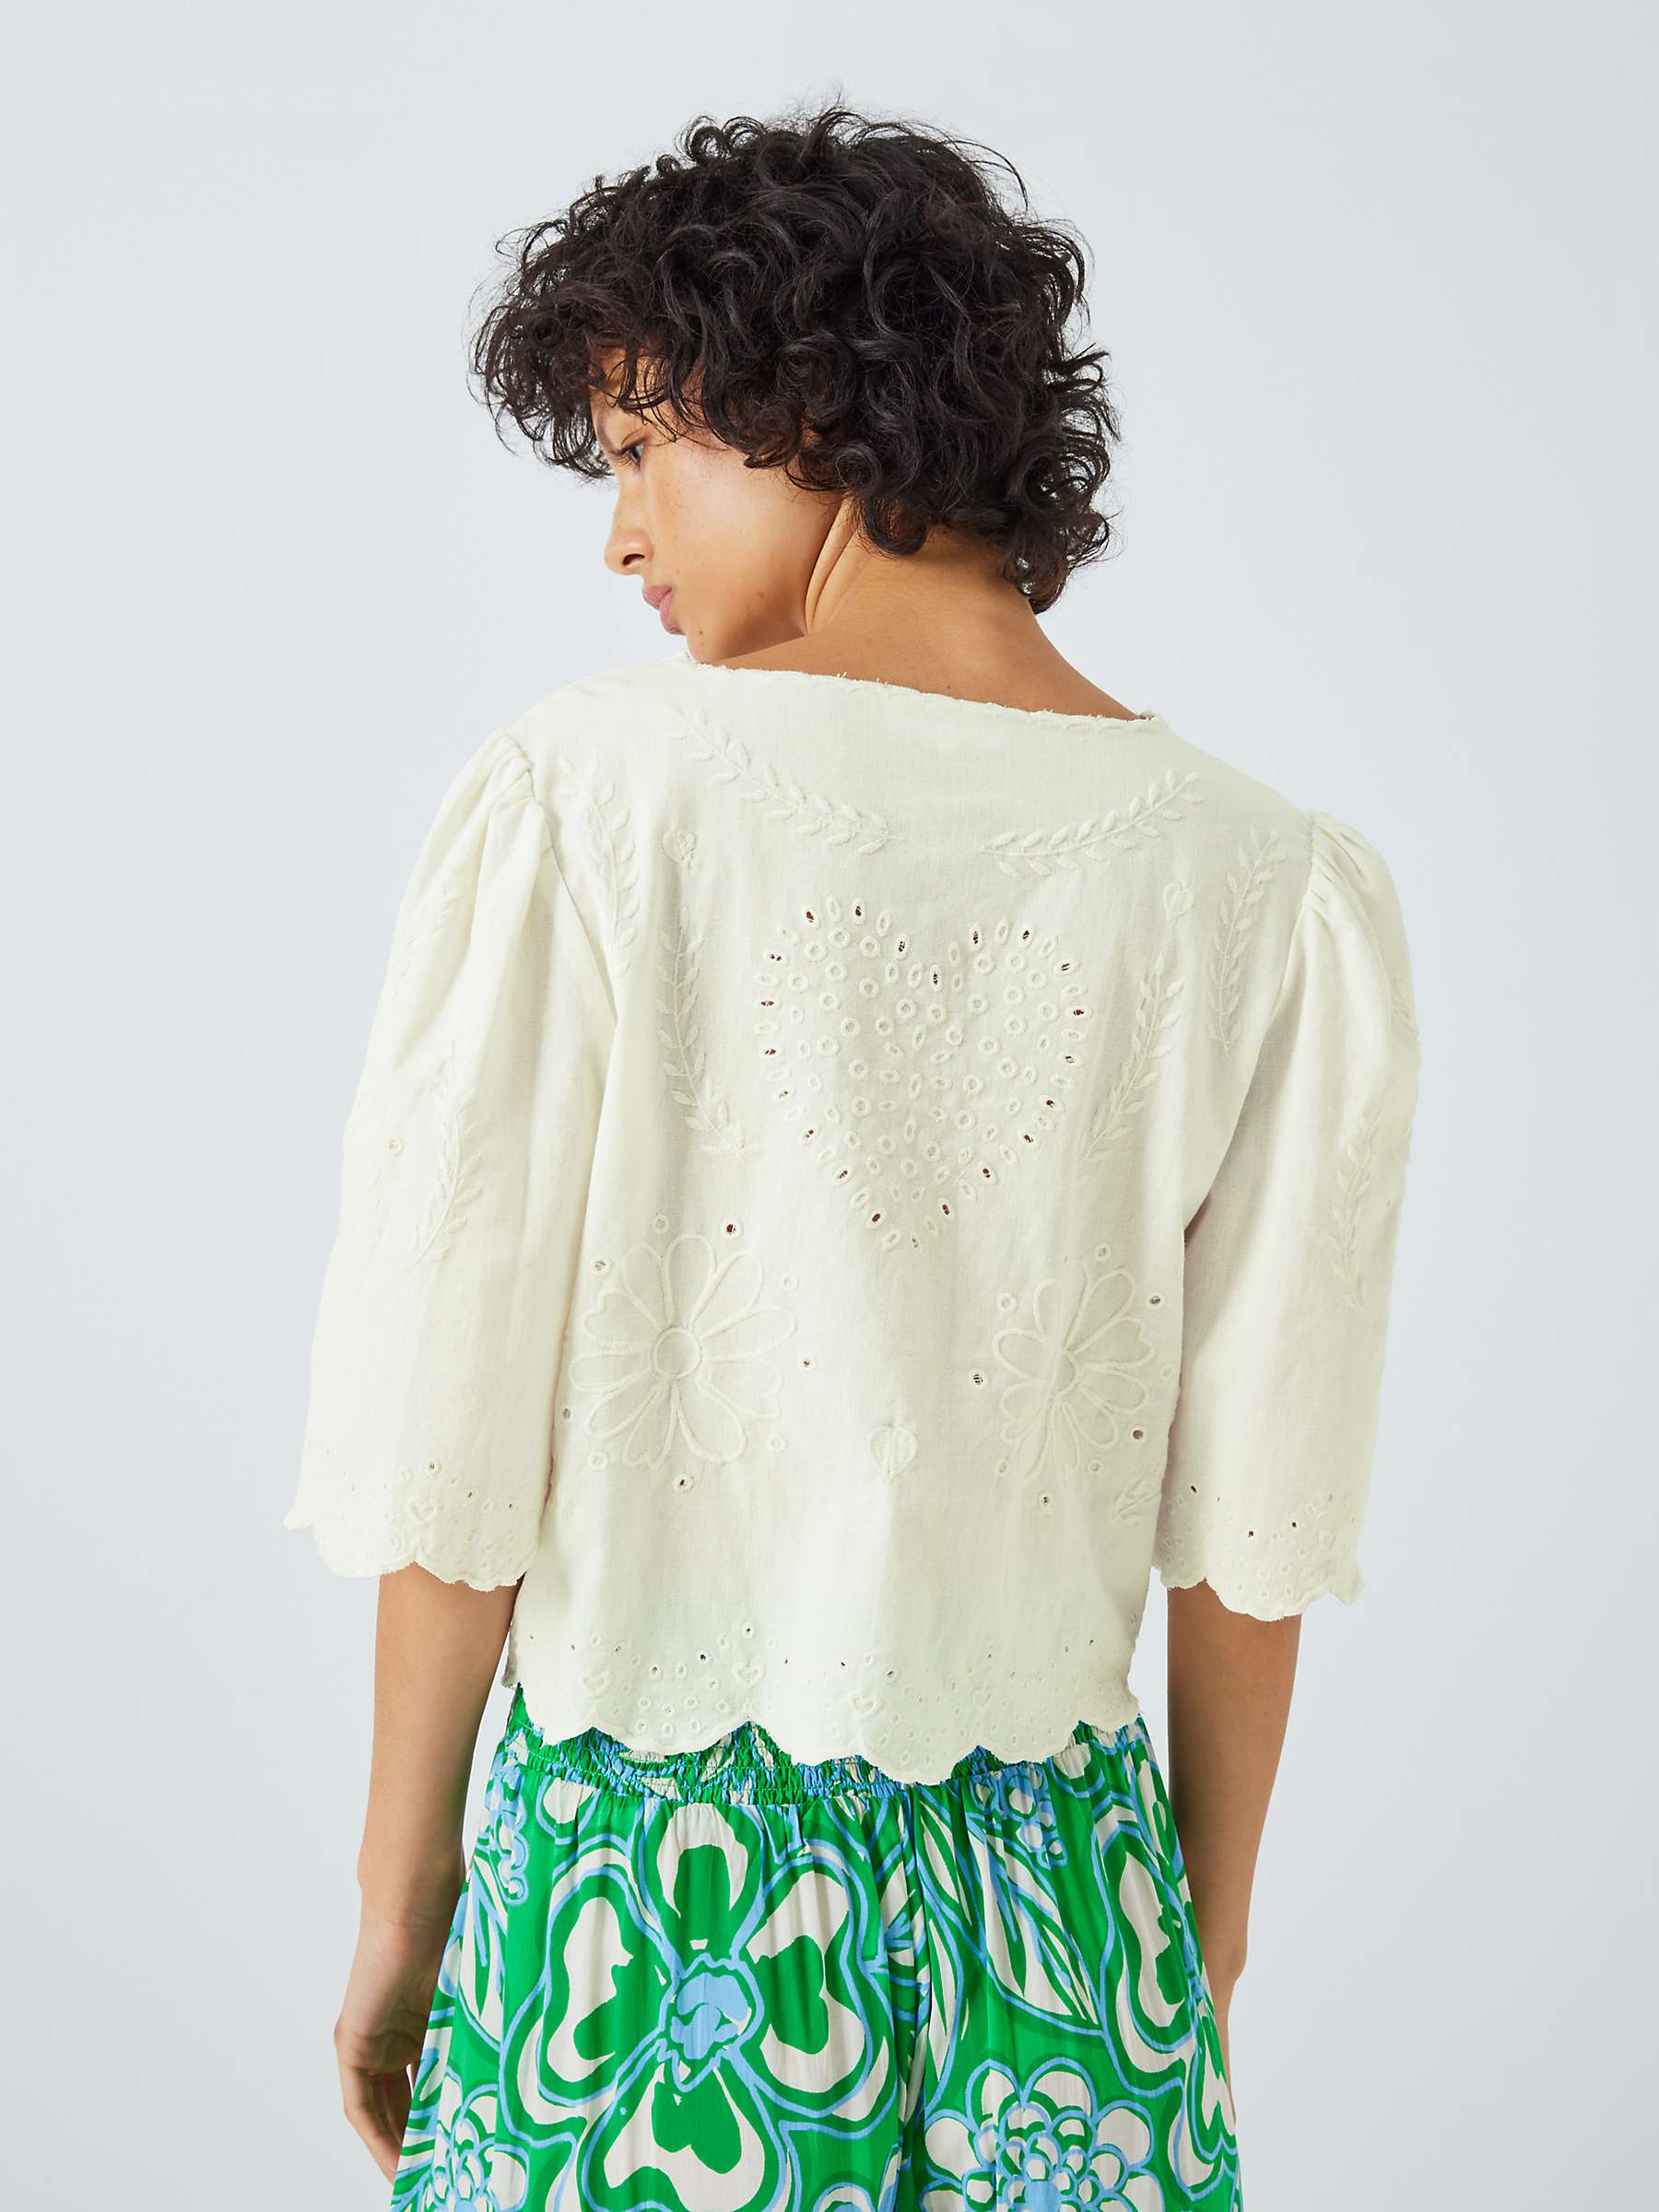 Buy Fabienne Chapot Sterre Broderie Balloon Sleeve Top, Cream White Online at johnlewis.com